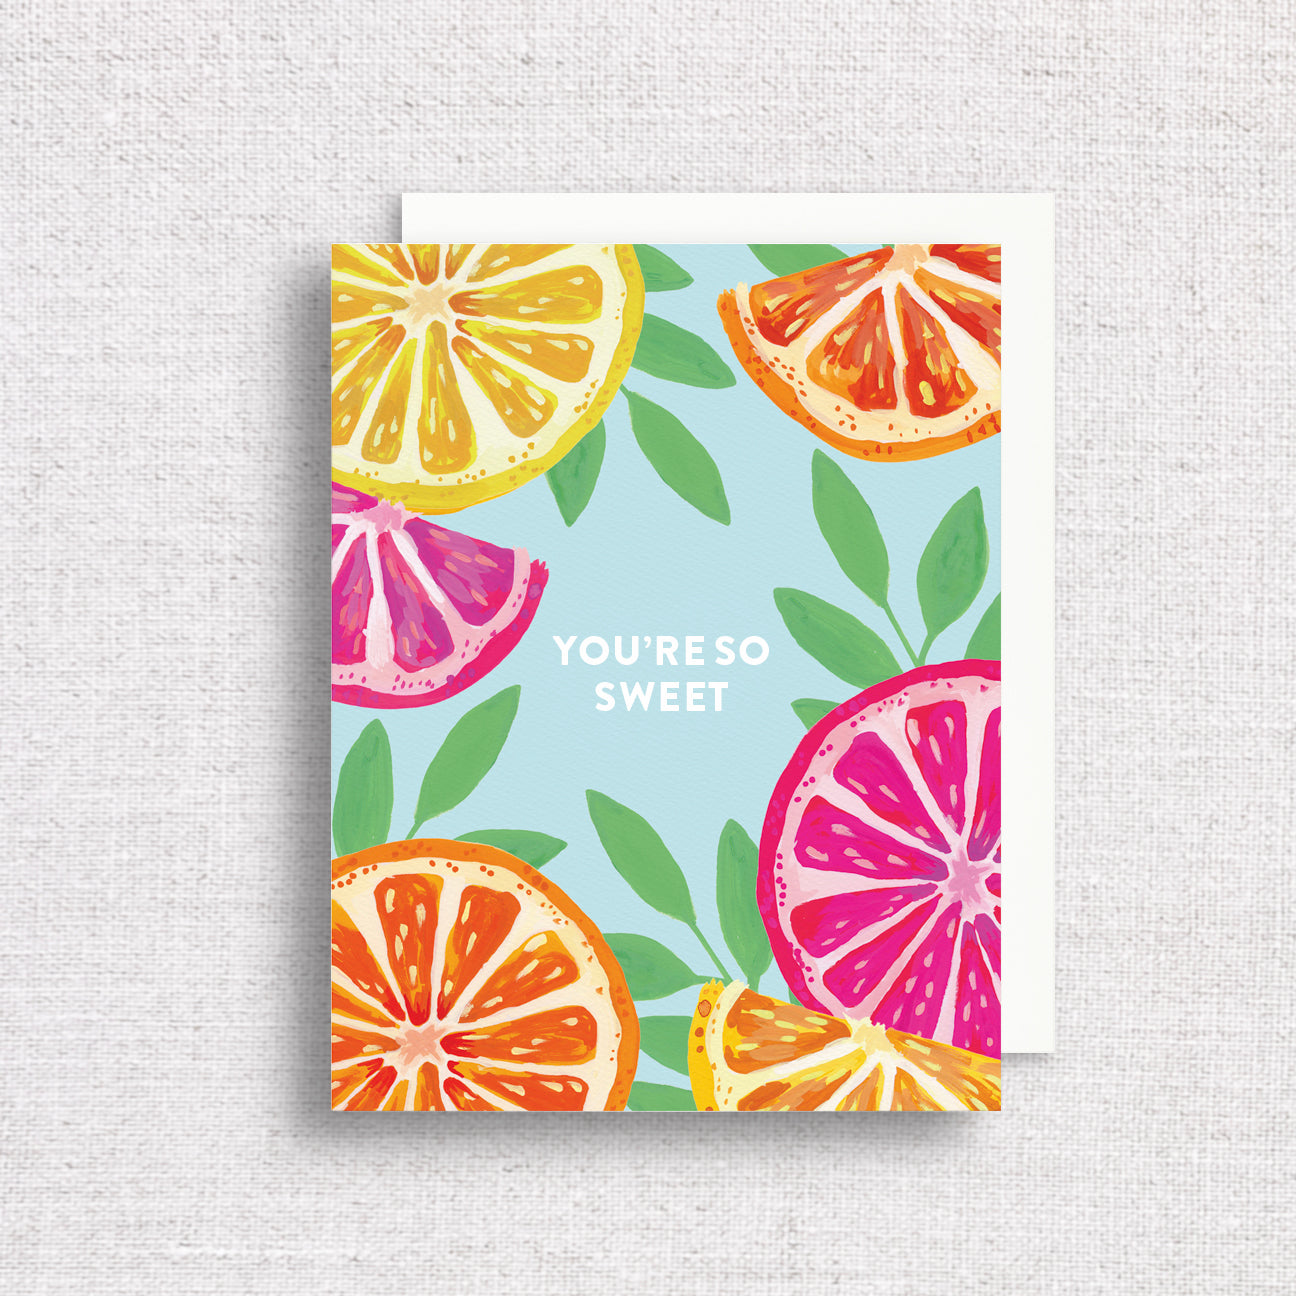 "You're So Sweet" Citrus Greeting Card  by gert & co